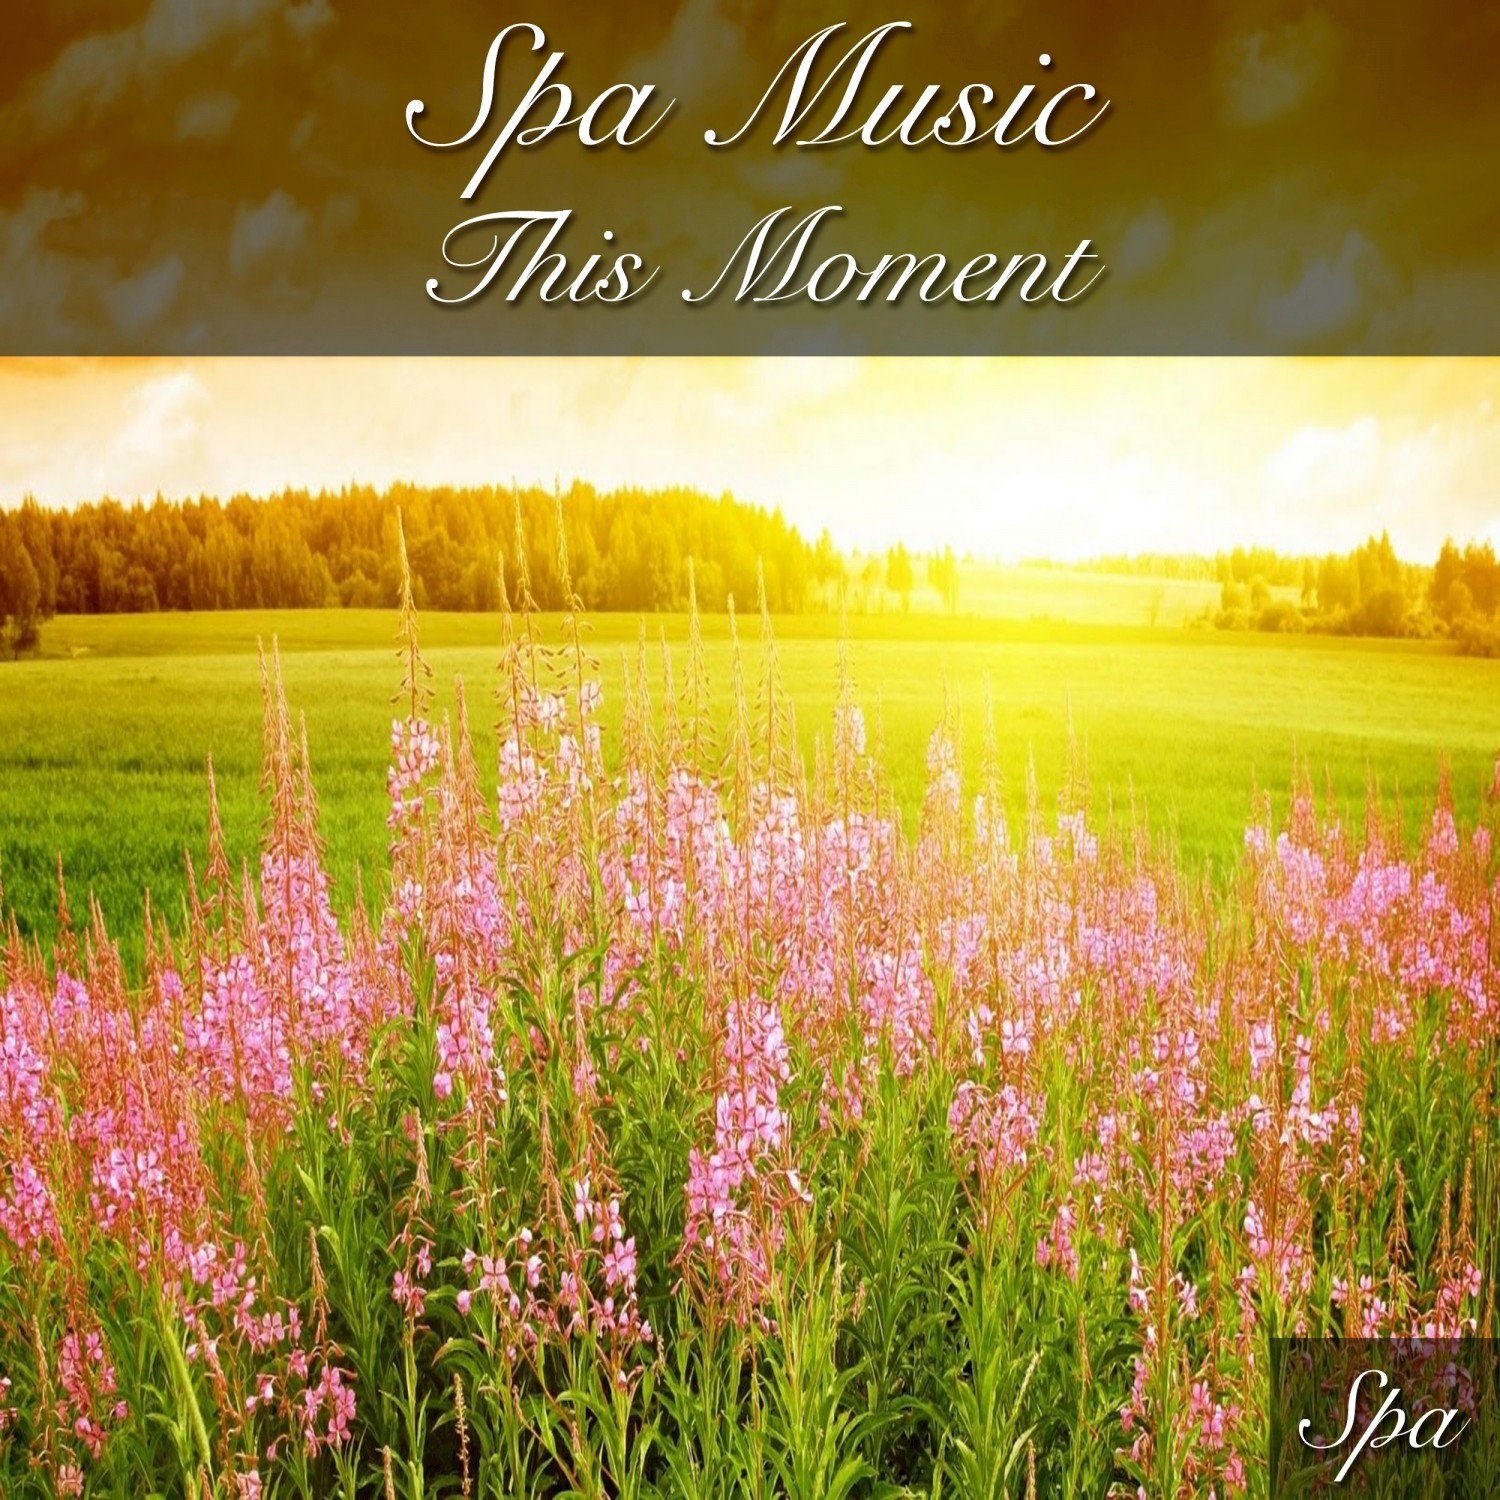 Spa Music This Moment